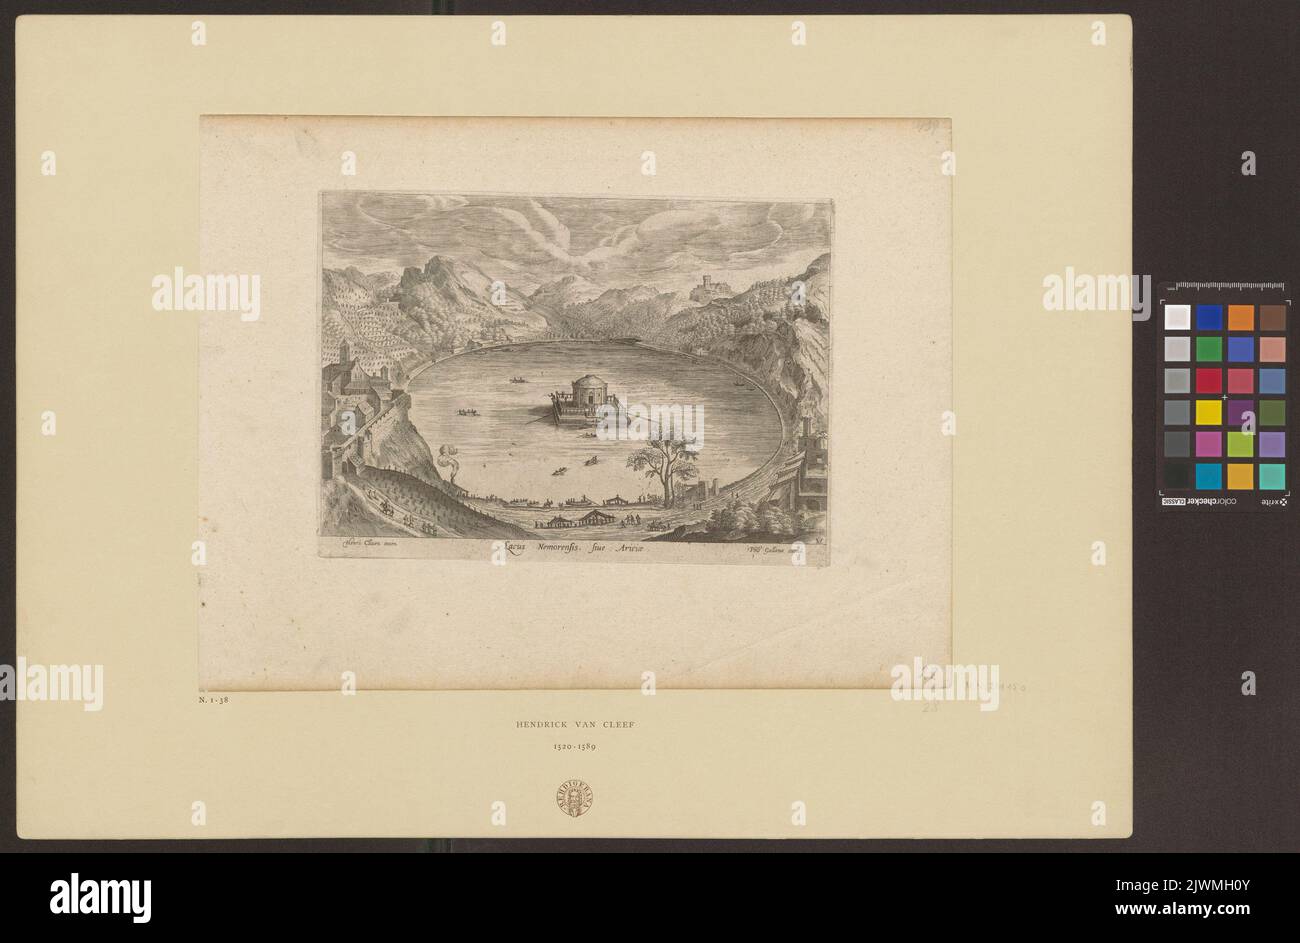 Lacus Nemorensis, view of a volcanogenic lake in the Alban Hills in Italy, in the middle of the lake, a rotunda on a pier with an angler.. Galle, Theodor (1571-1633), graphic artist, Galle, Philips (1537-1612), graphic artist, Cleve, Hendrick van, III (ca 1525-1589), draughtsman, cartoonist Stock Photo